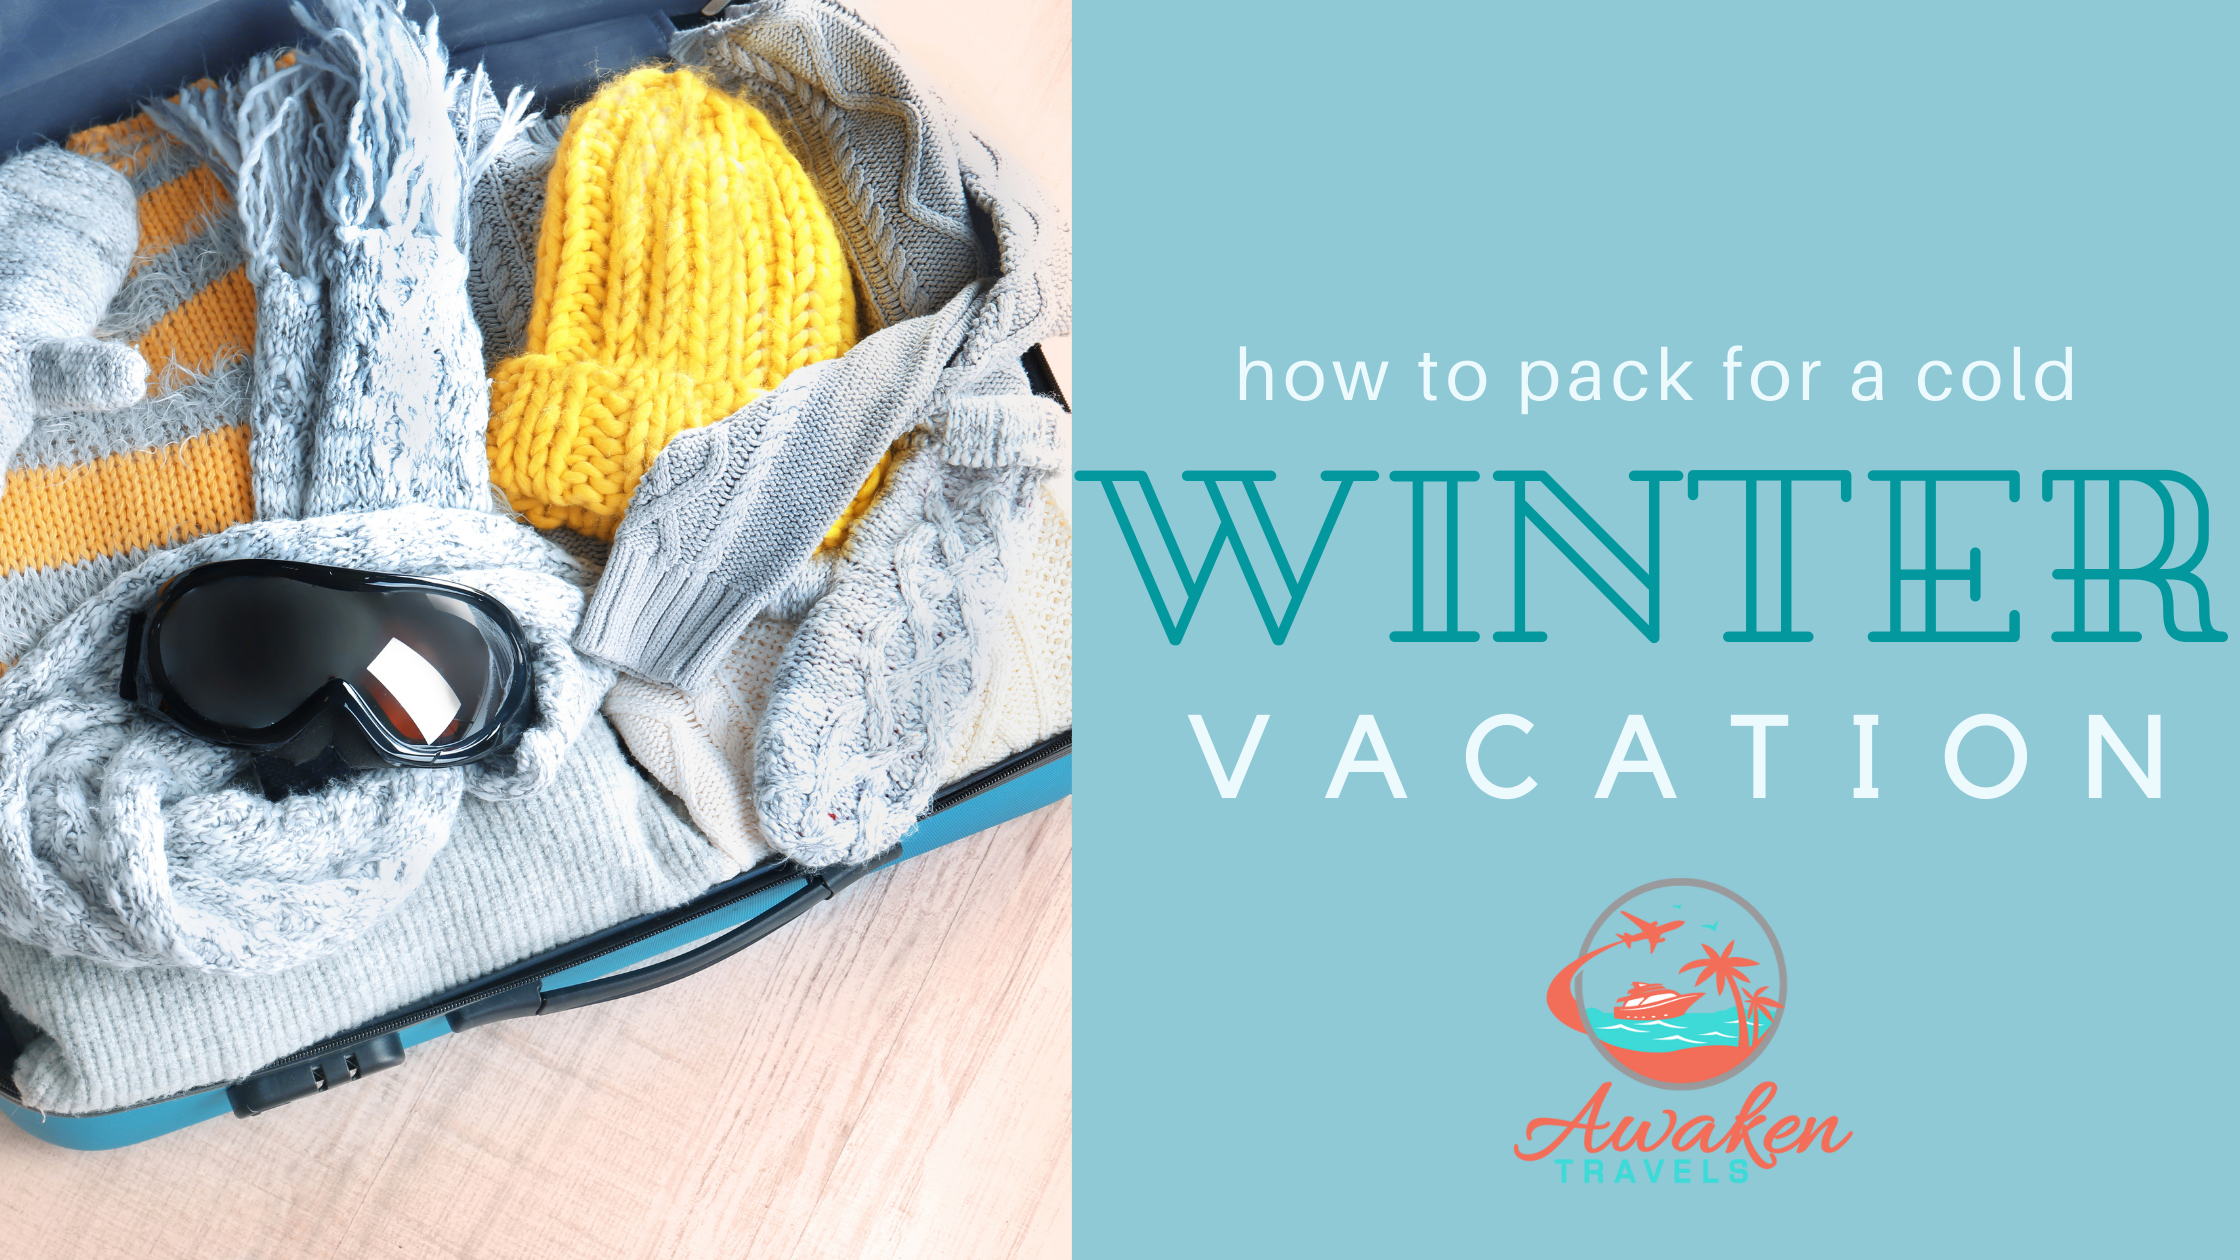 8 expert tips when packing for a cold weather vacation